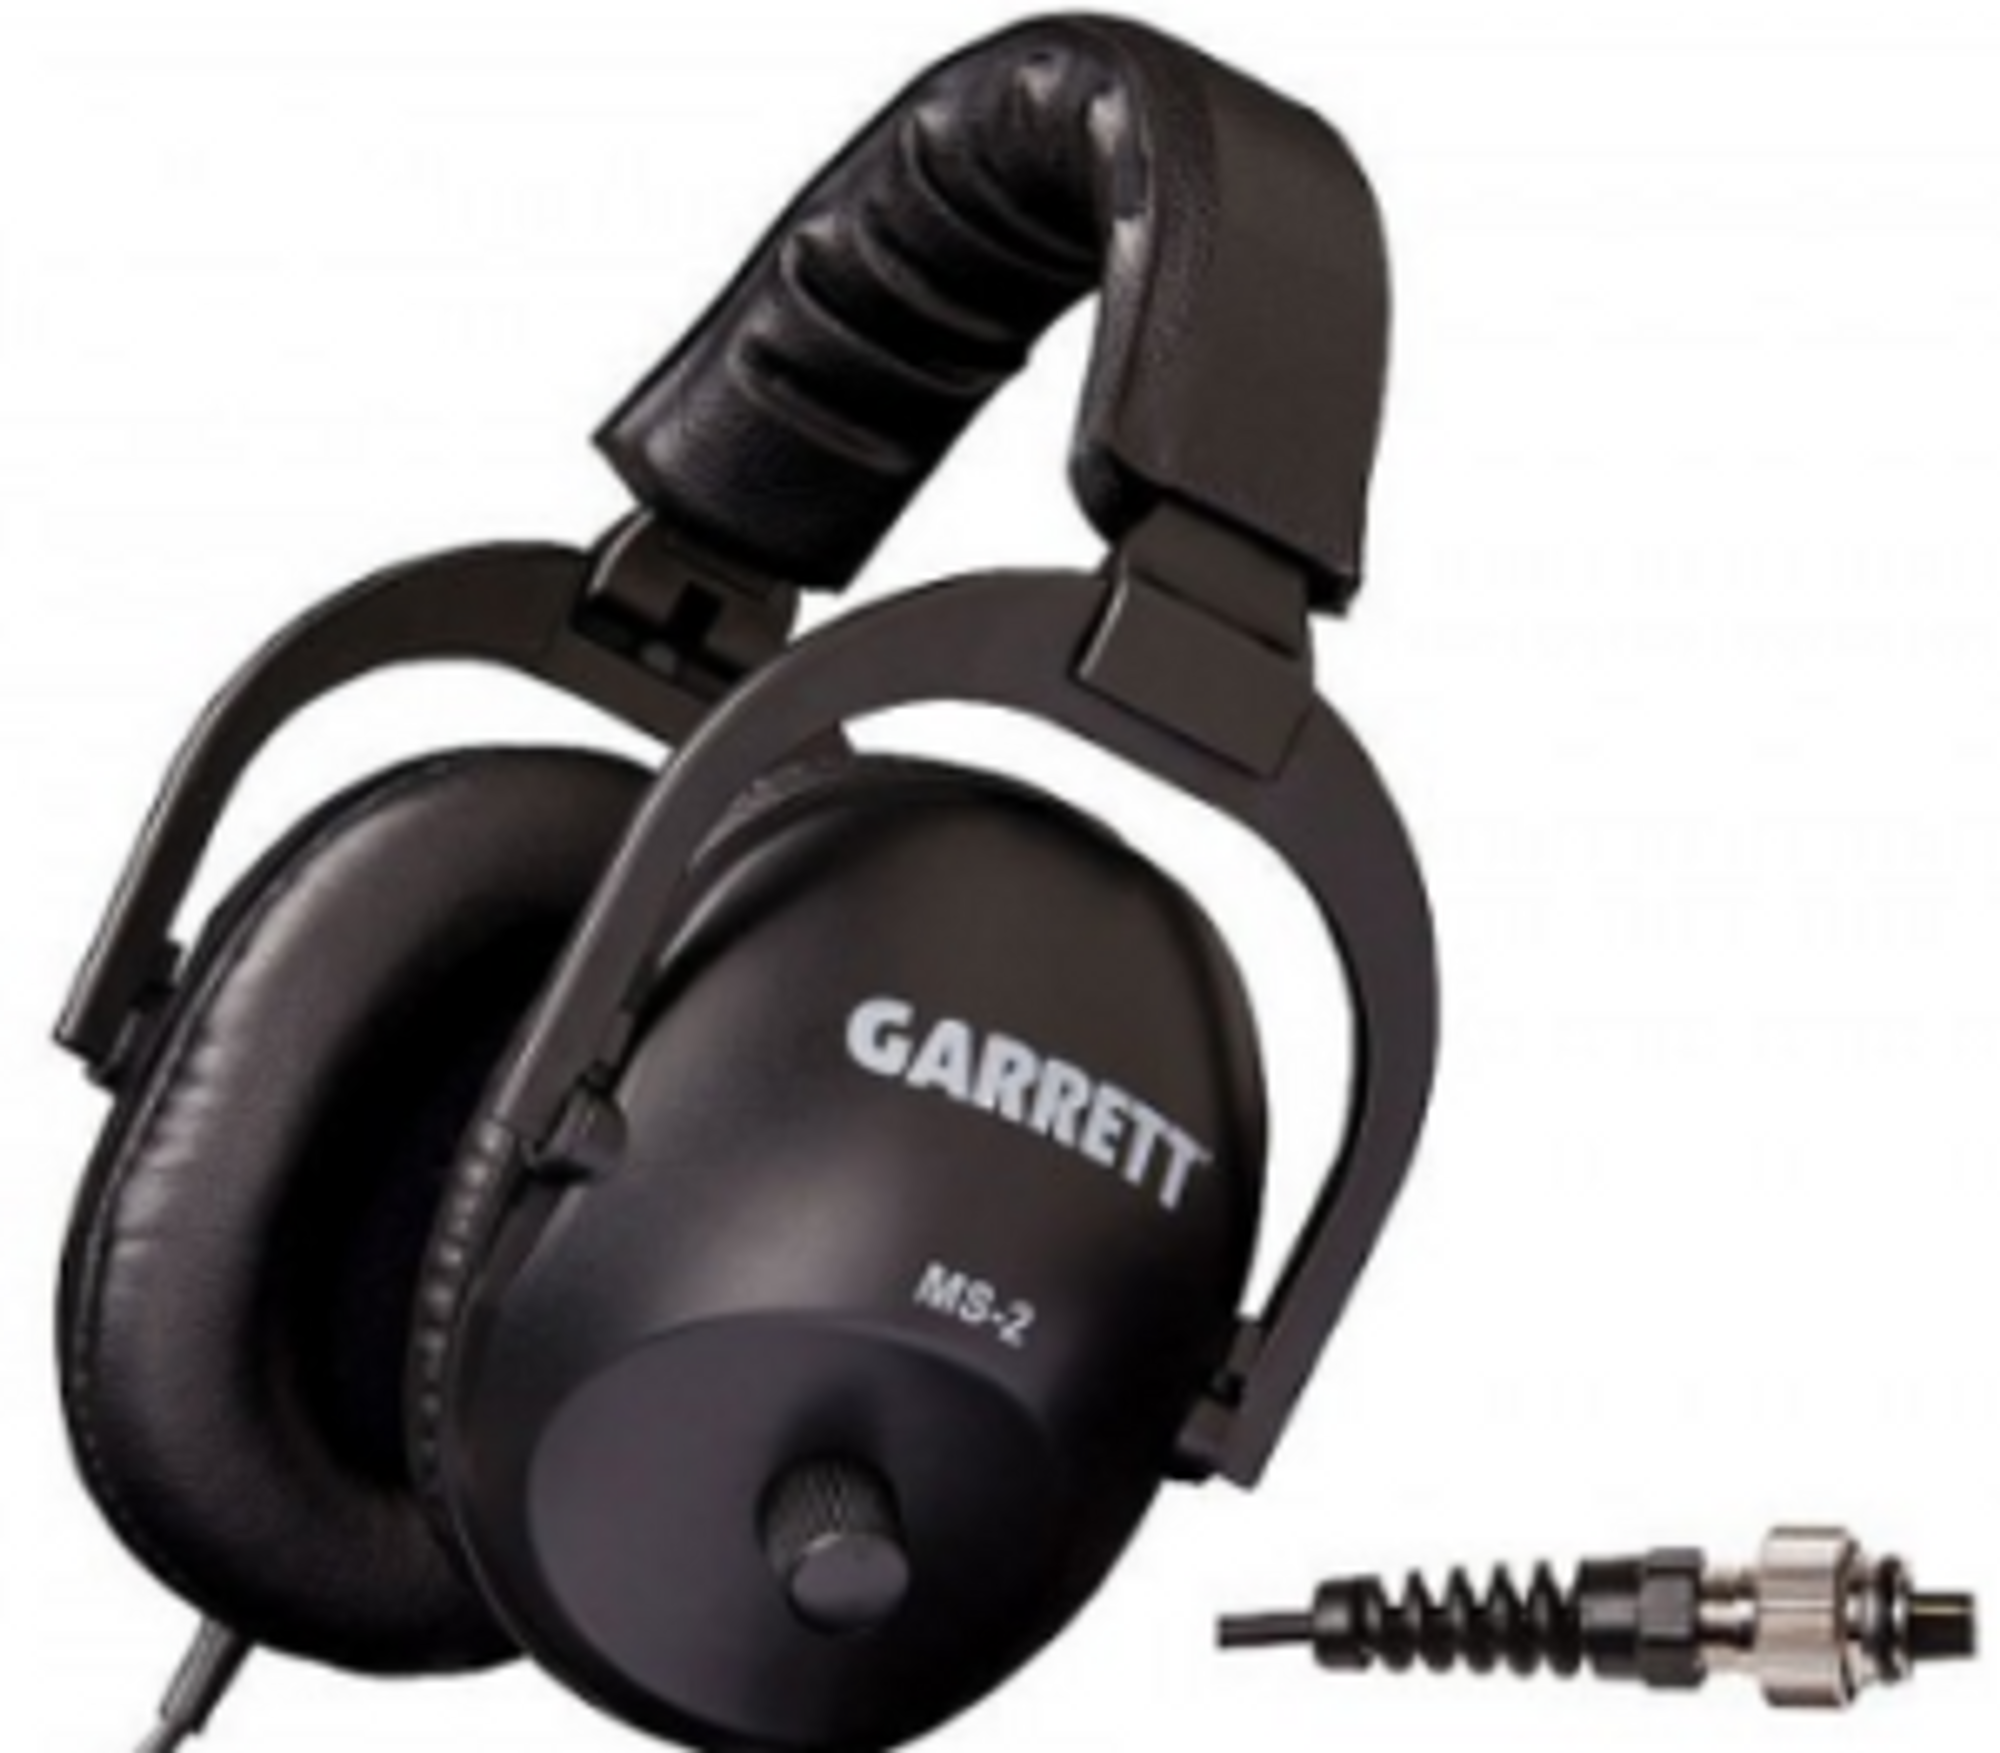 Garrett MS-2 Headphones With AT 2-Pin Connector